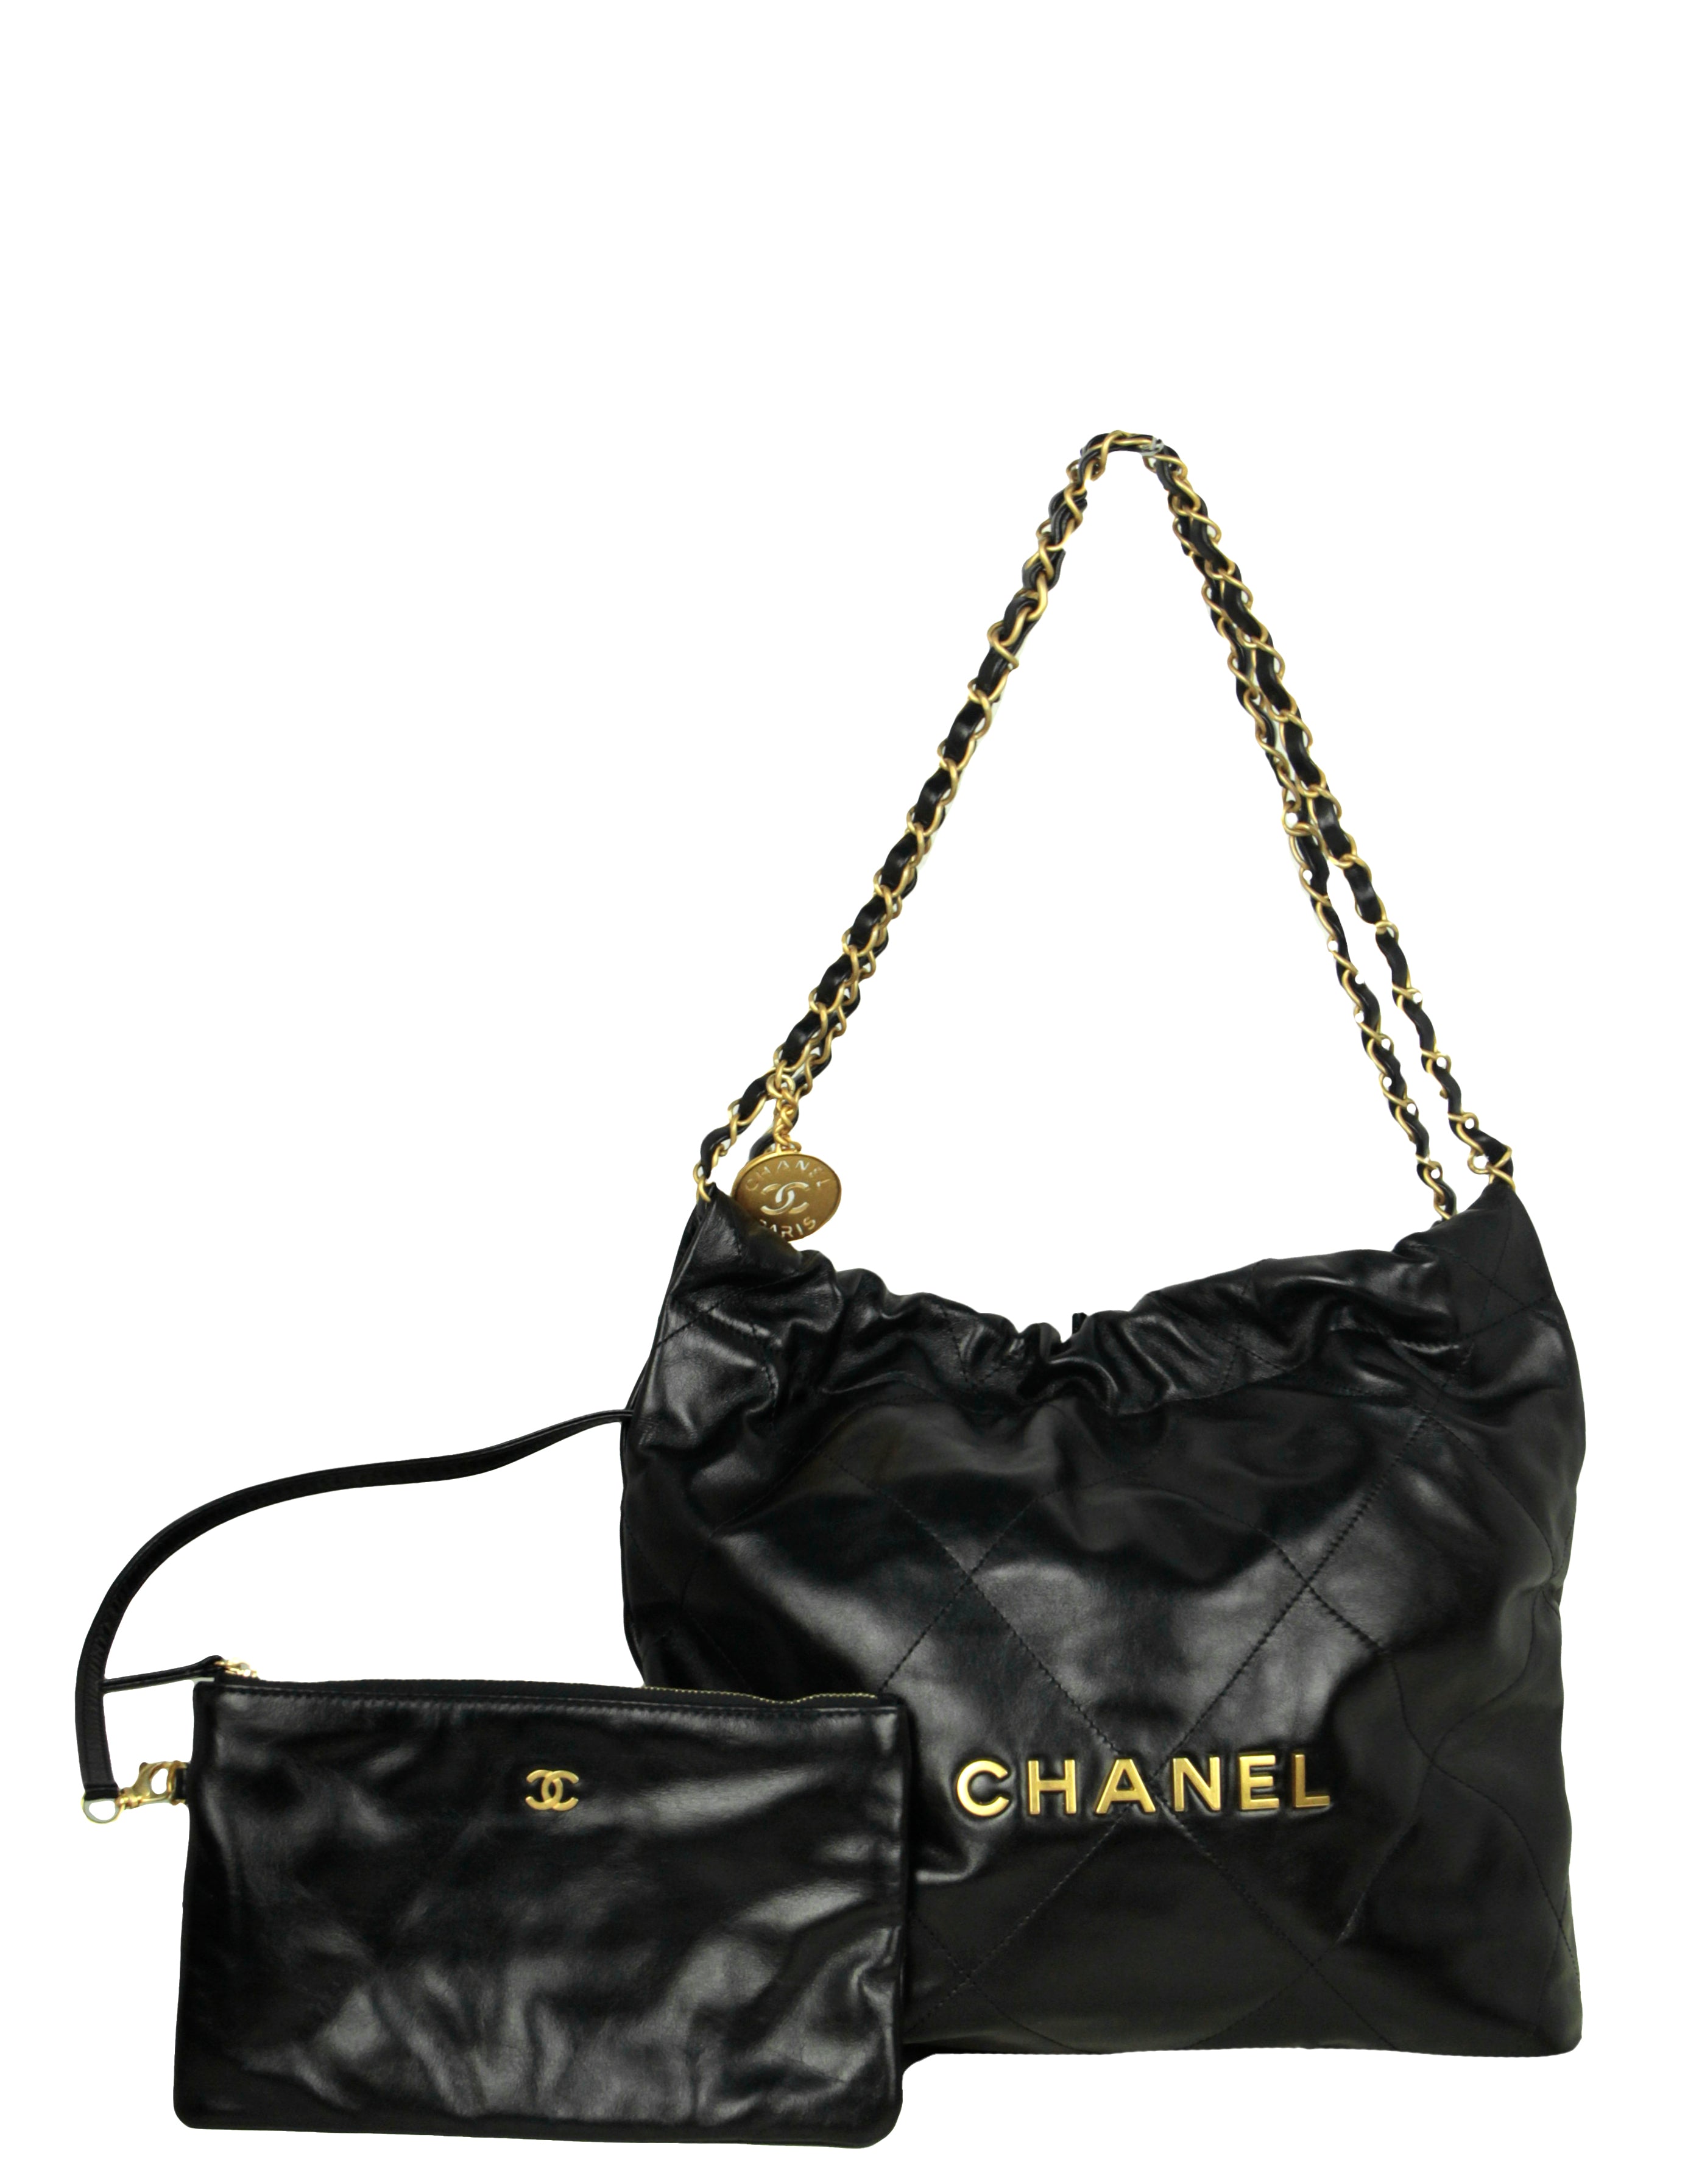 CHANEL Sequin Tote Bags & Handbags for Women, Authenticity Guaranteed